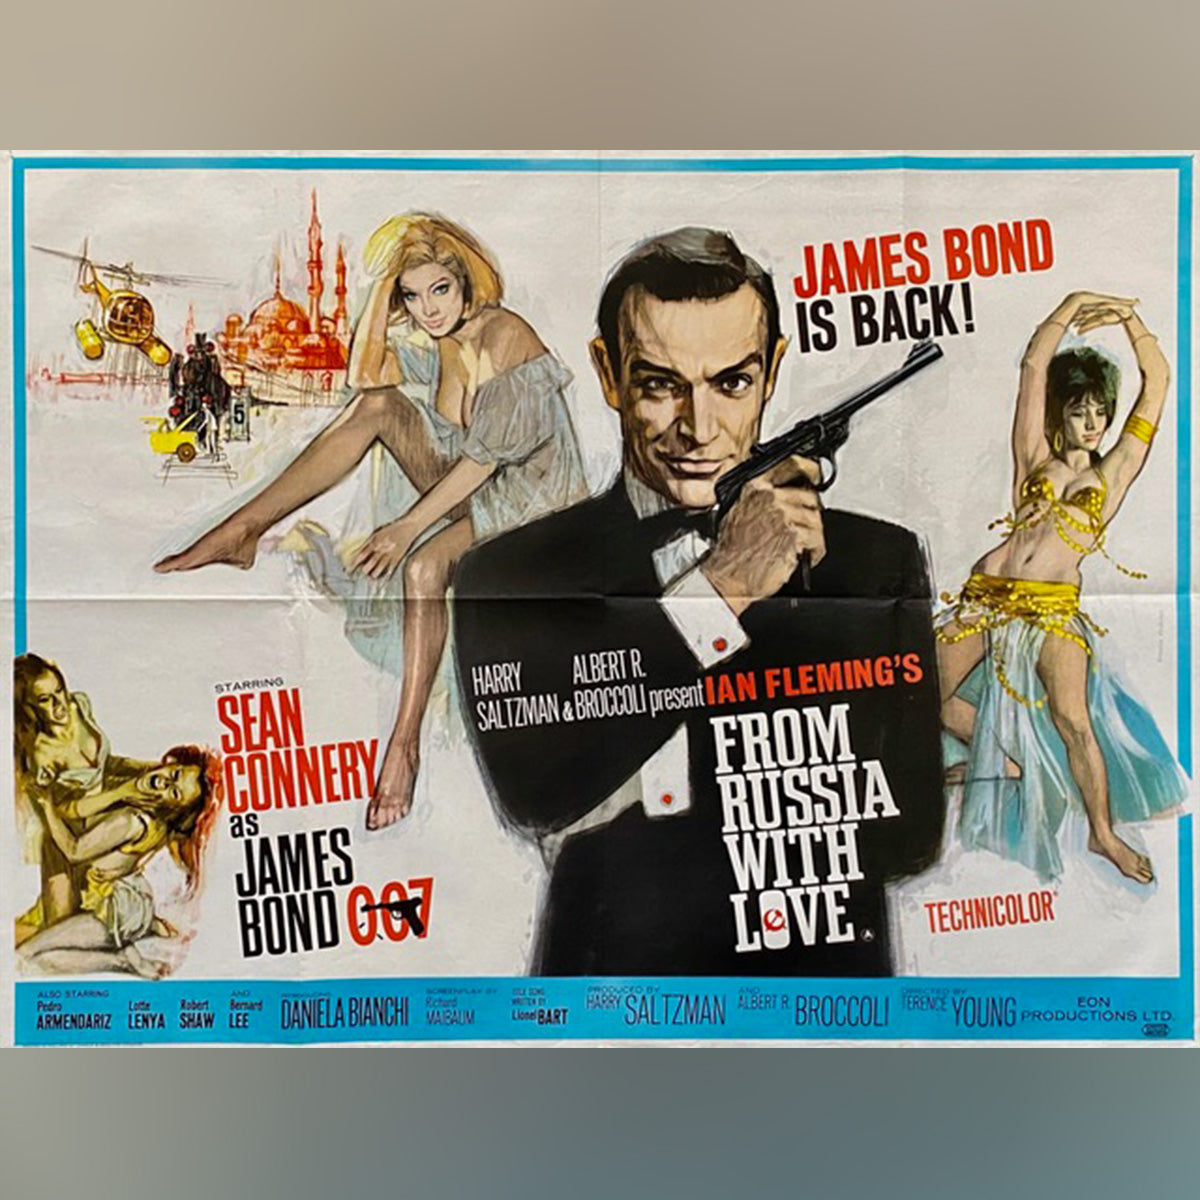 Original Movie Poster of From Russia With Love (1963)